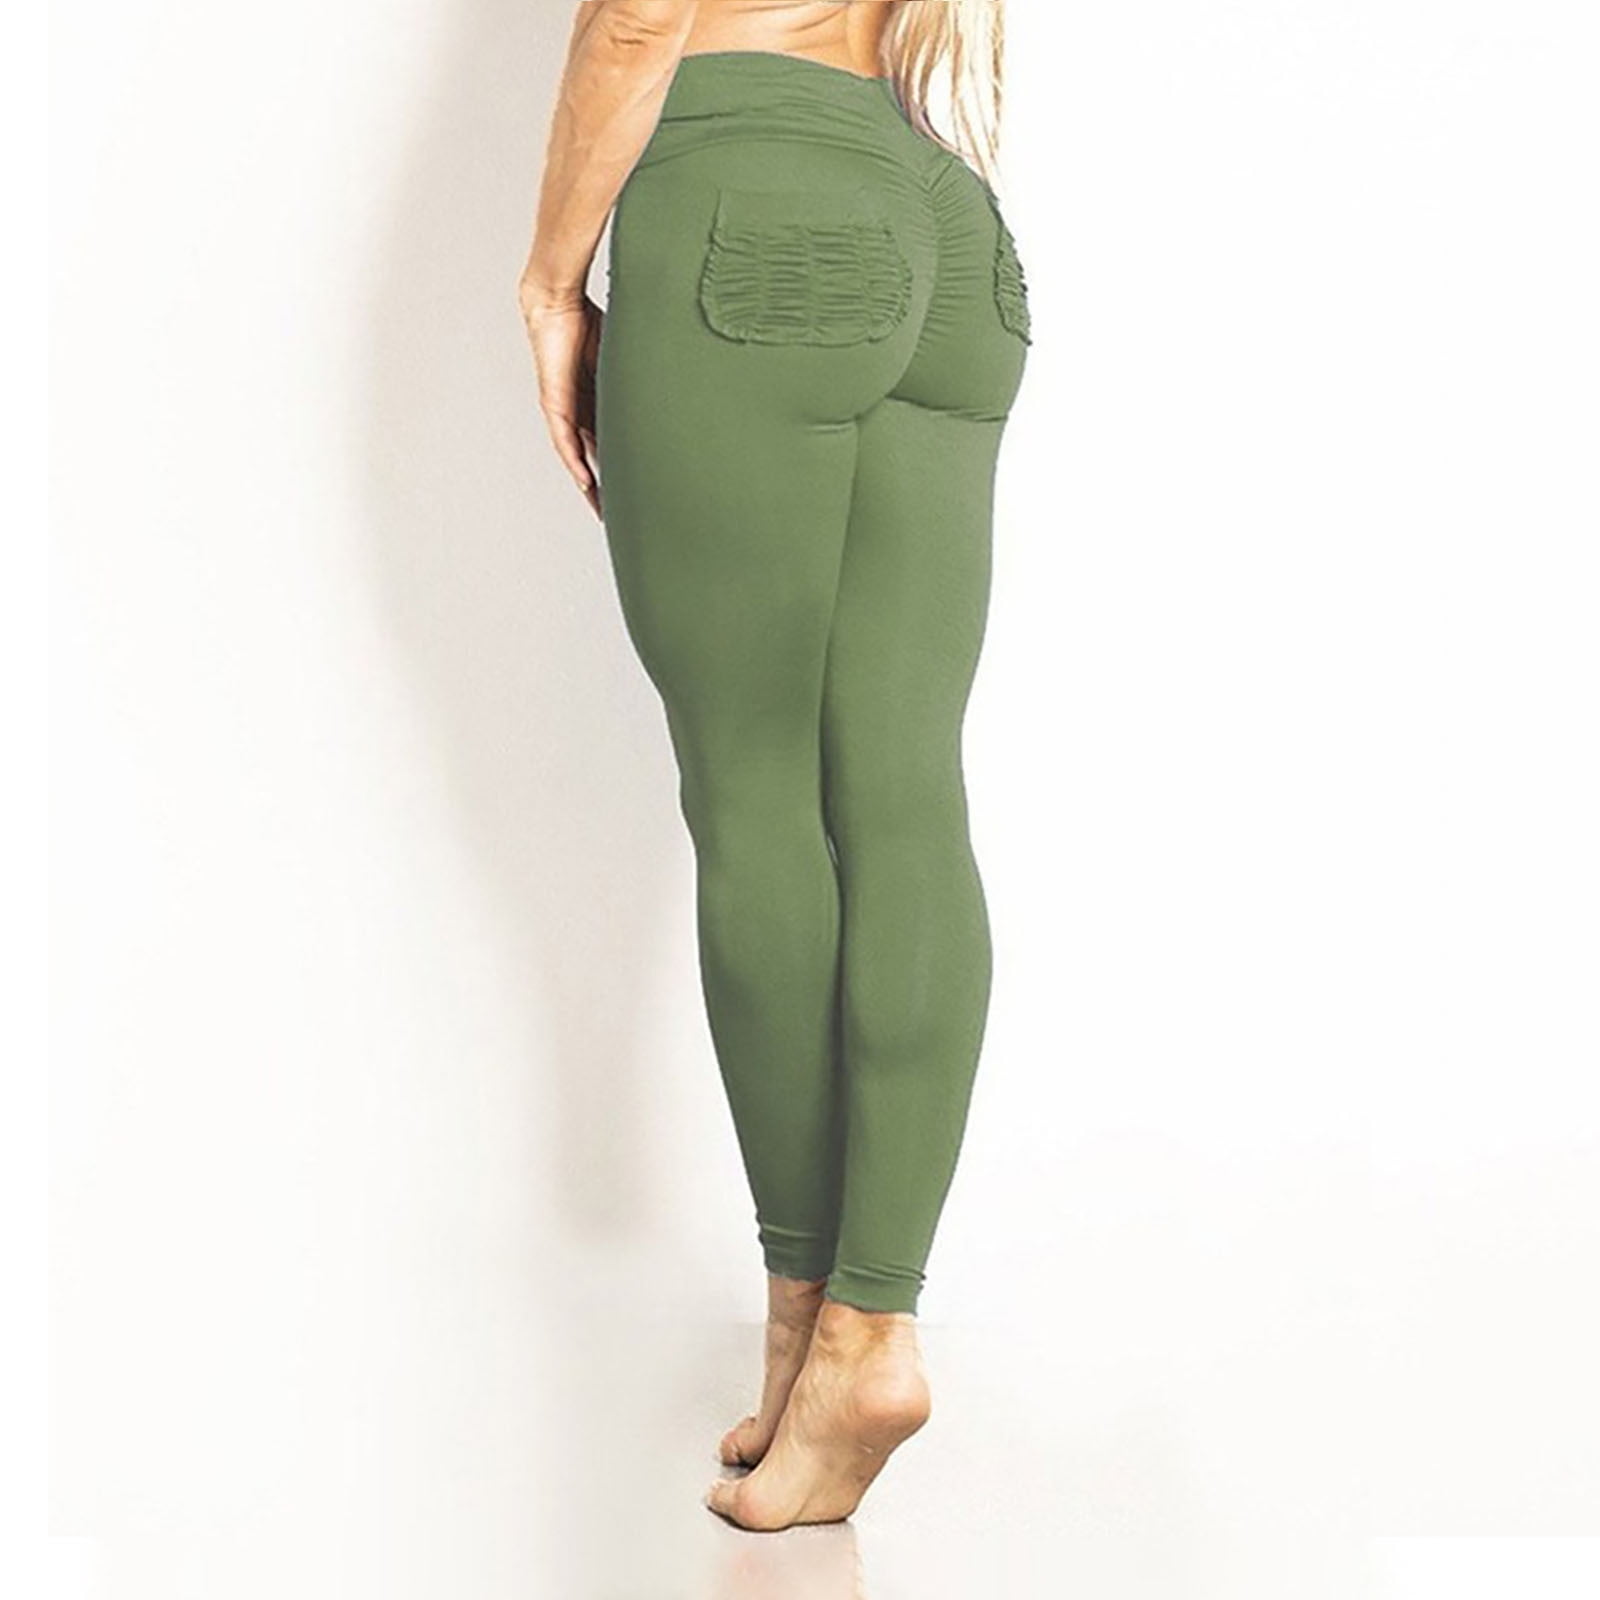 linqin Cute Deer Wood Sexy Yoga Pants for Women Seamless High